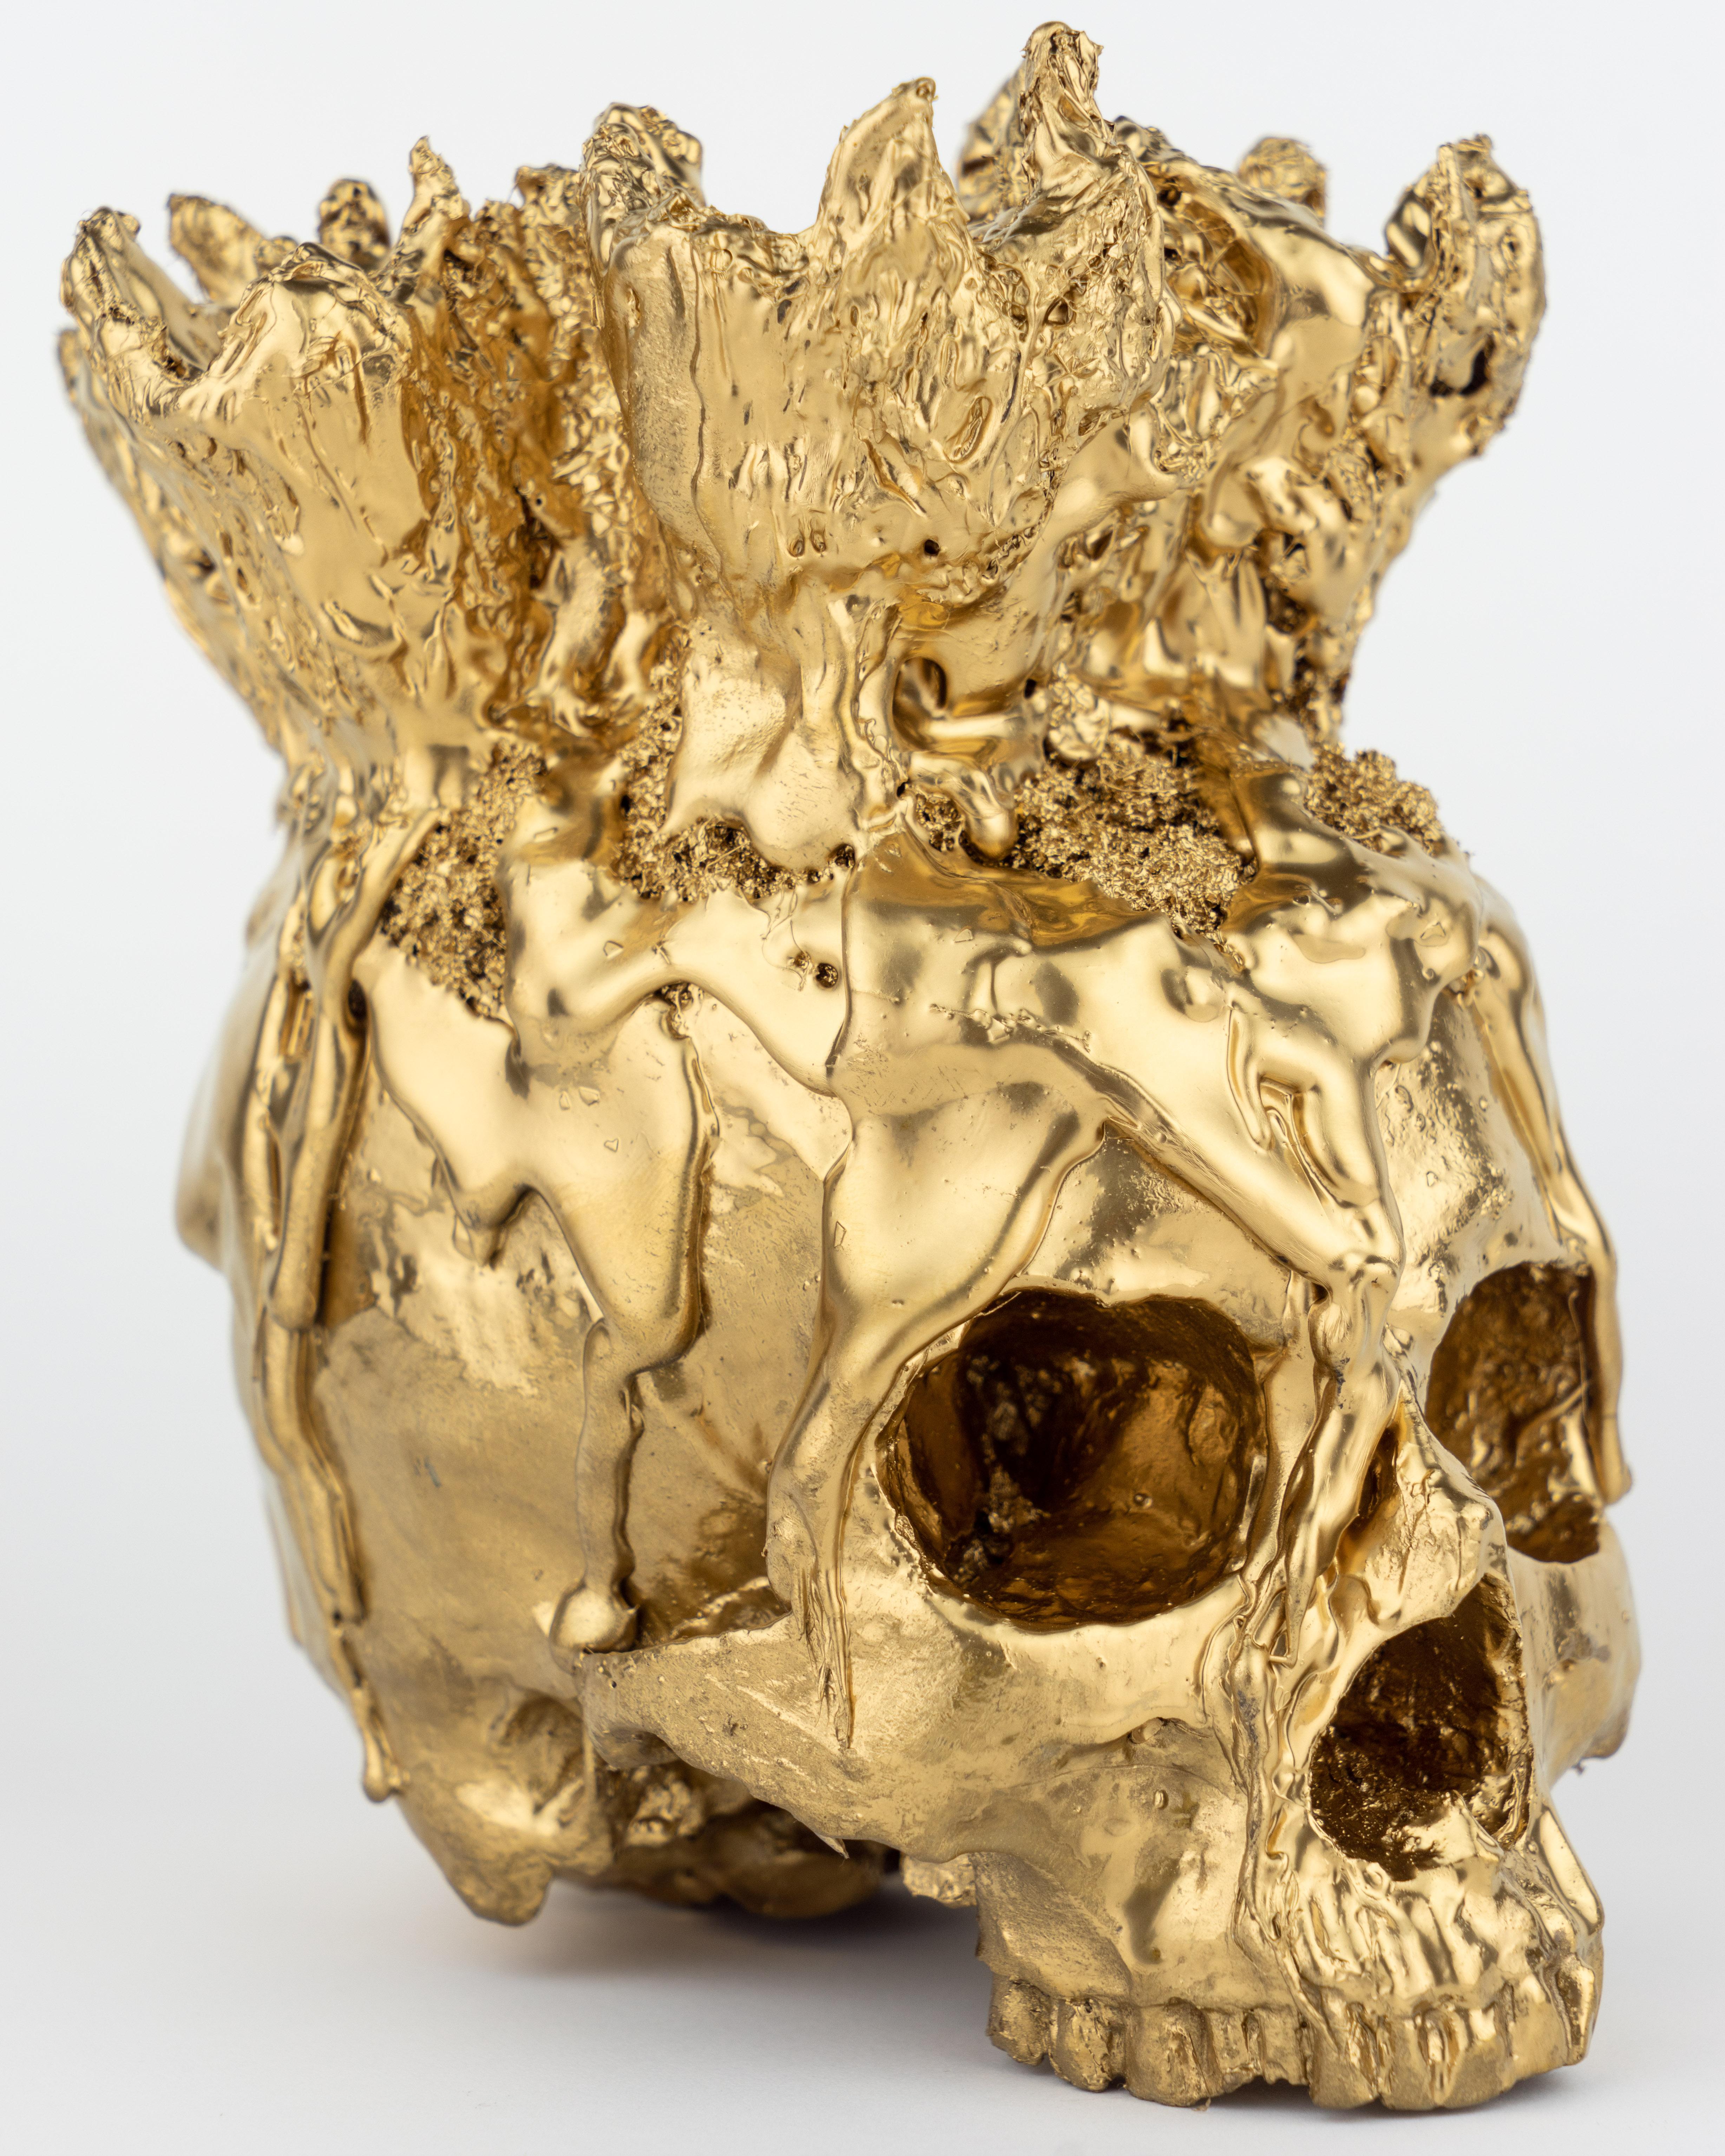 This Gold Skull Vase by Sarah Raskey is a 8 x 6.5 x 7 inch textured mixed media sculpture composed of natural and manmade elements. 
A lustrous gold skull sculpture adorned with a headdress vase to fill with flowers etc. 

Sarah Raskey is a